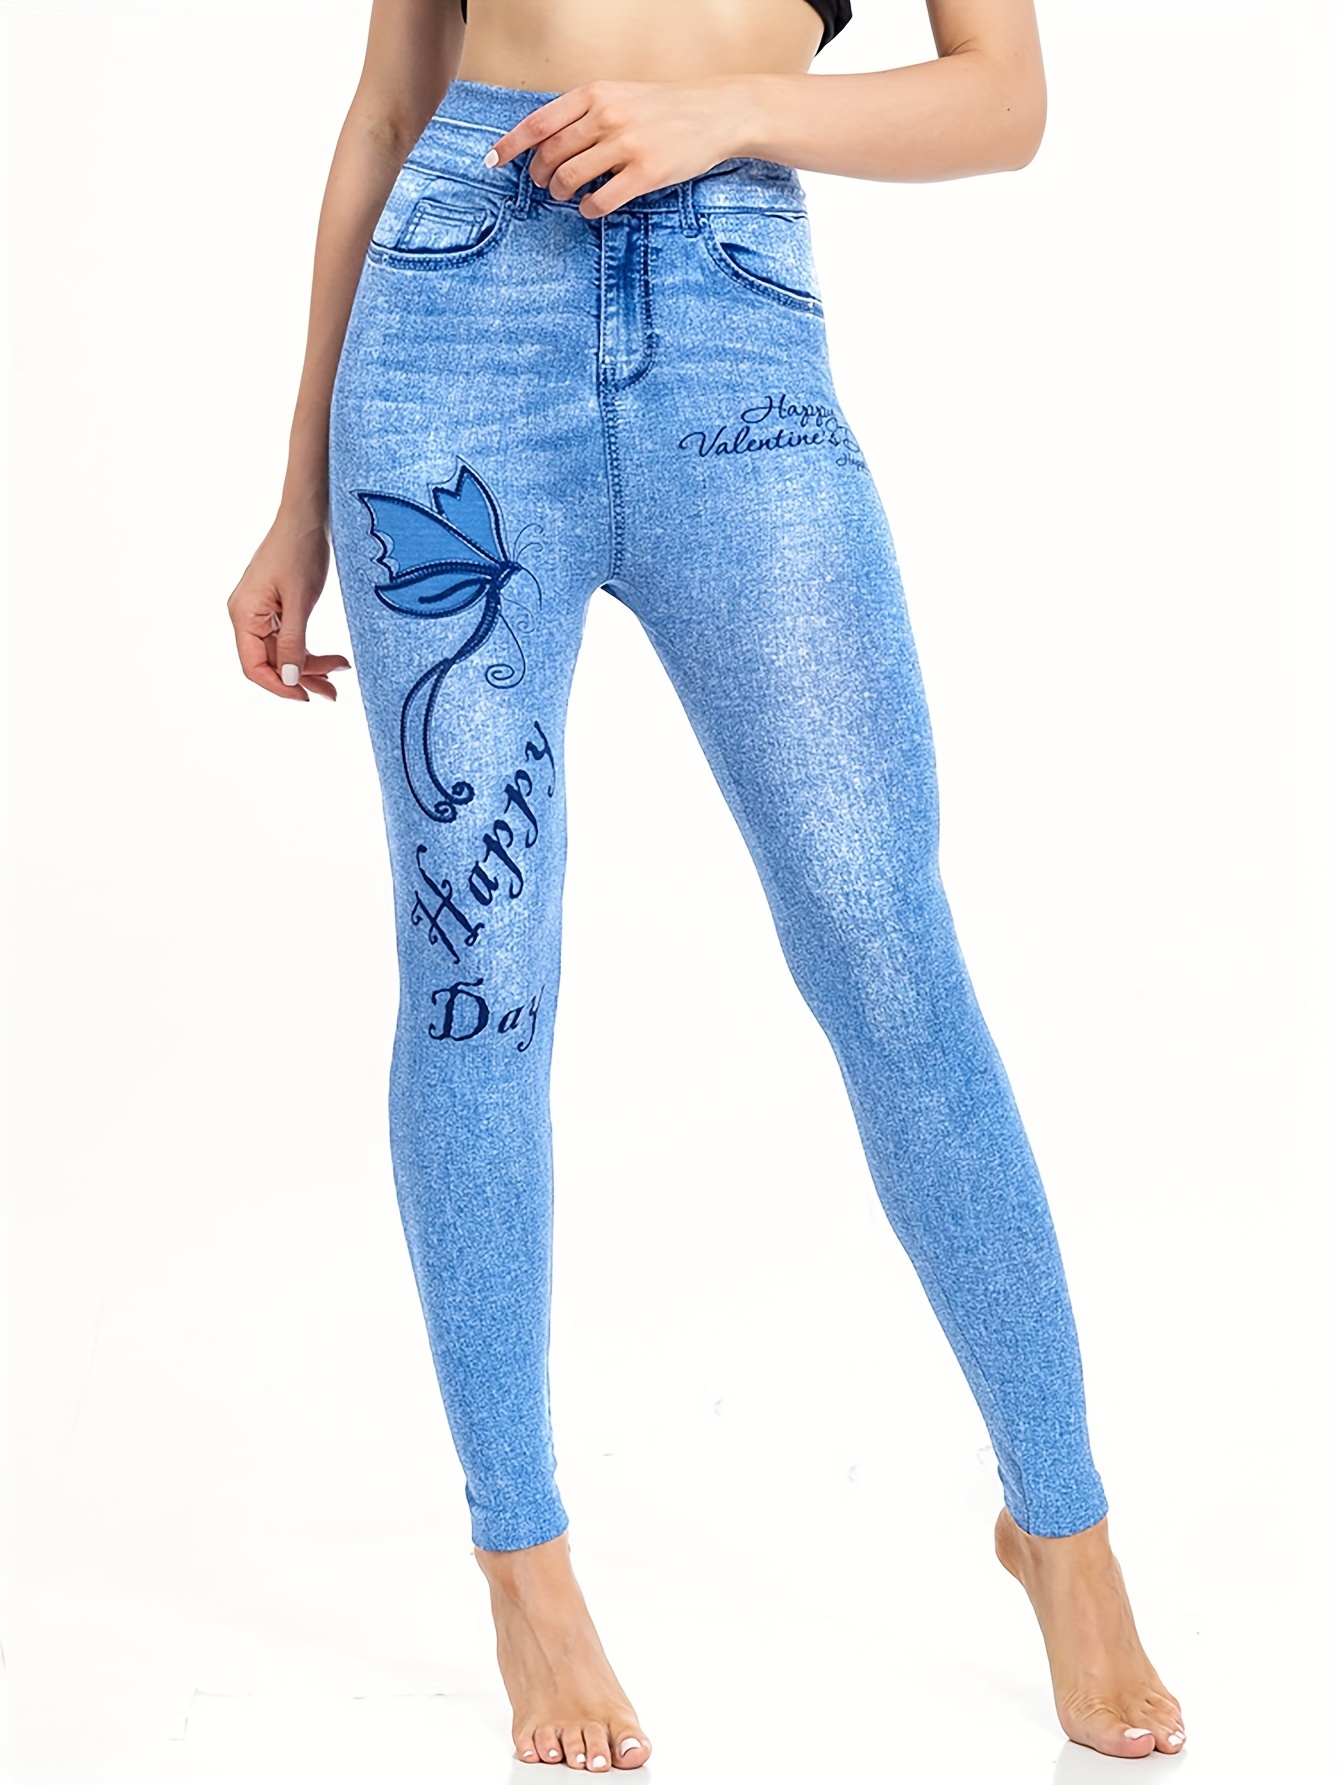 Blue Butterfly Print Faux Denim Jeans Leggings For Women Slim Fitness Jeans  Trousers For Ladies With Elastic Seamless Design YM8267 From Whosalechina,  $10.76